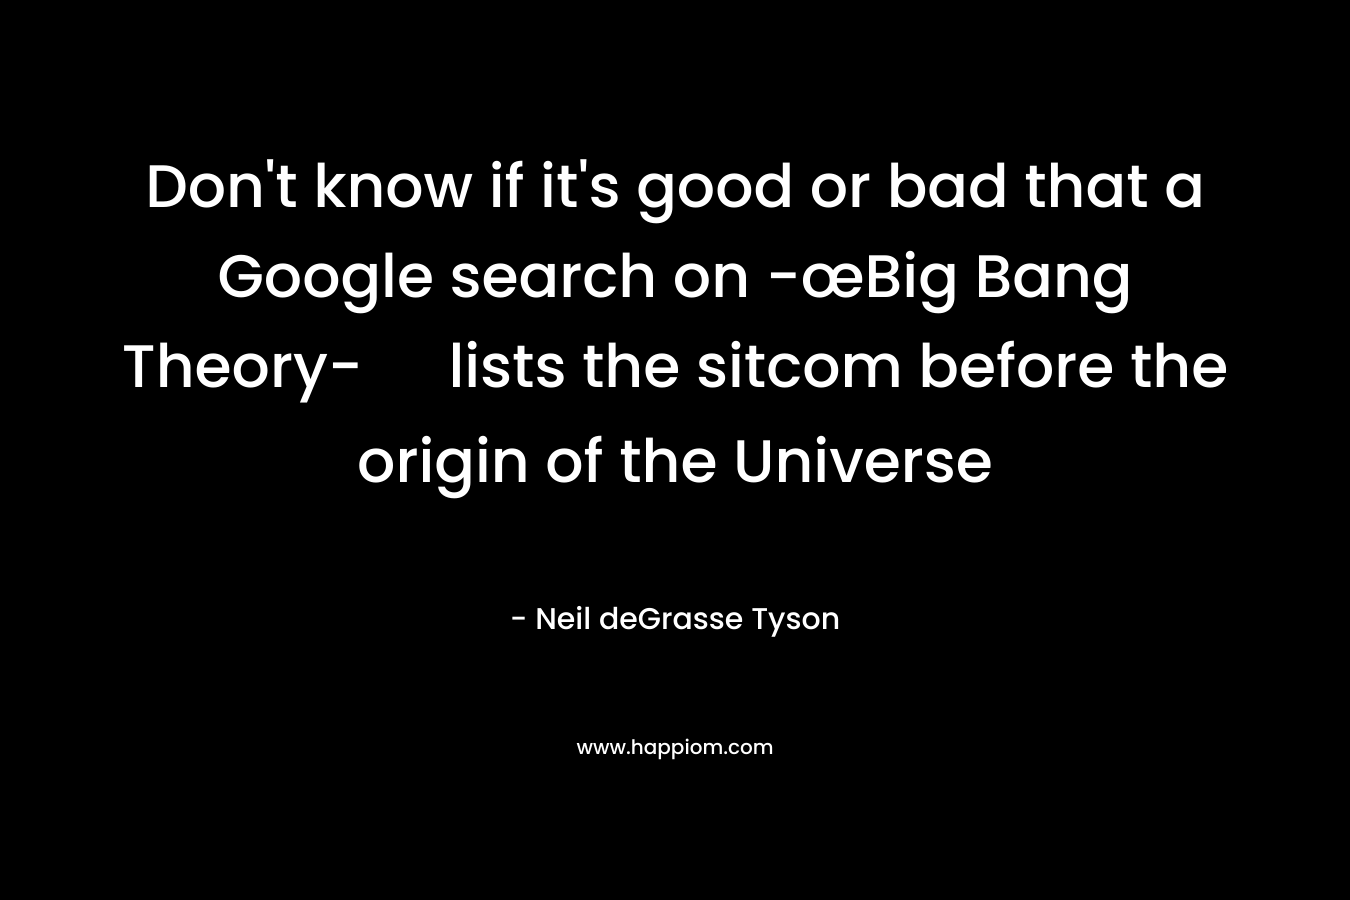 Don't know if it's good or bad that a Google search on -œBig Bang Theory- lists the sitcom before the origin of the Universe